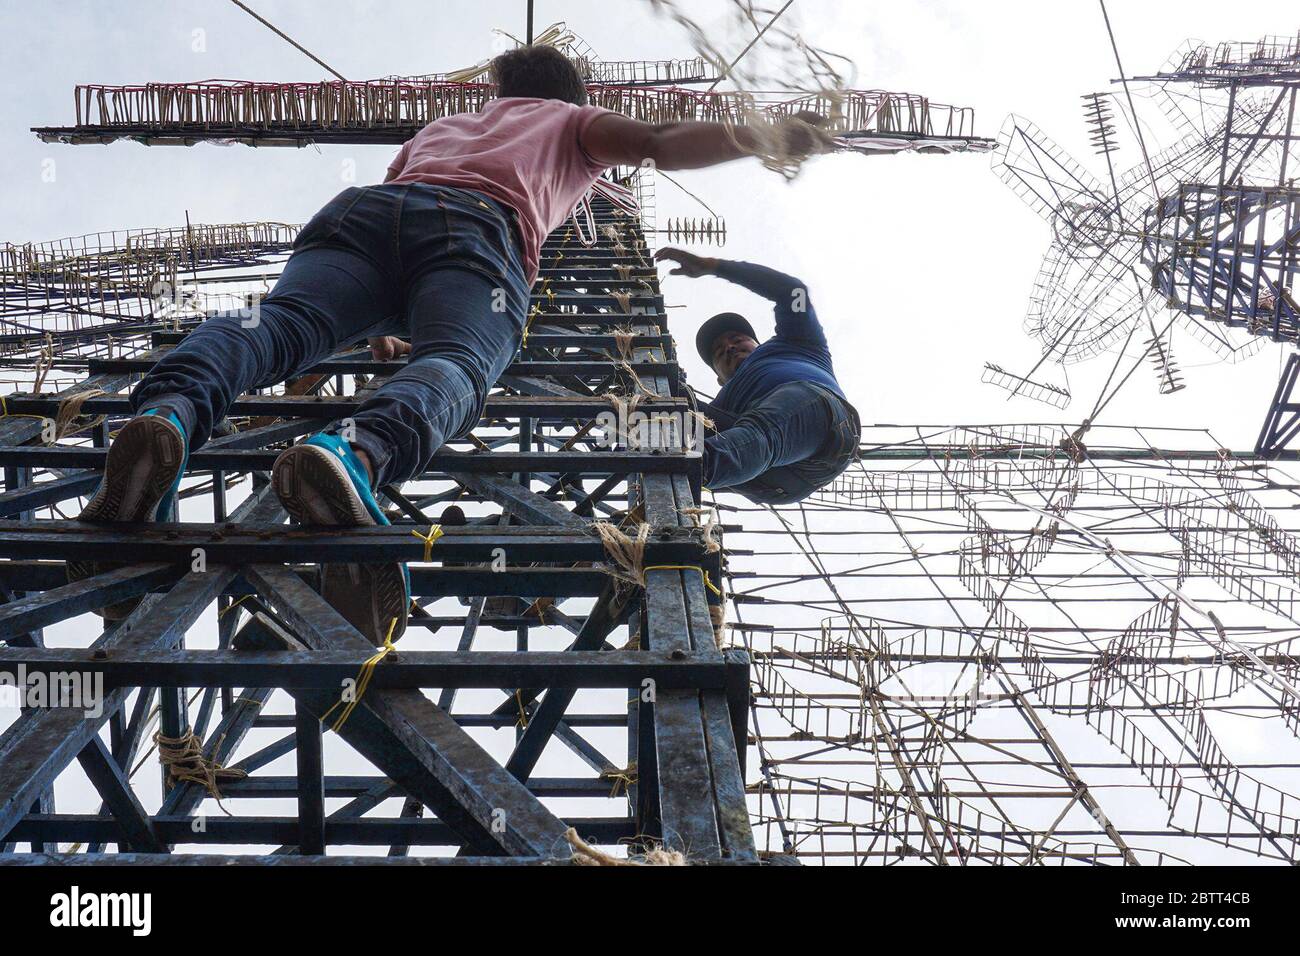 Ángel González, 19 (left), and Javier Hernández, 25, climb a tower on a pyrotechnic castle, a wooden structure used for celebrations in Mexico City. When the gunpowder lights on the castles are ignited, they create the silhouette of a brilliantly lit castle for a few minutes. “Making pyrotechnic castles is what I like to do the most,” says González, who has worked on their construction for five years. (Mar Garcia, GPJ Mexico) Stock Photo